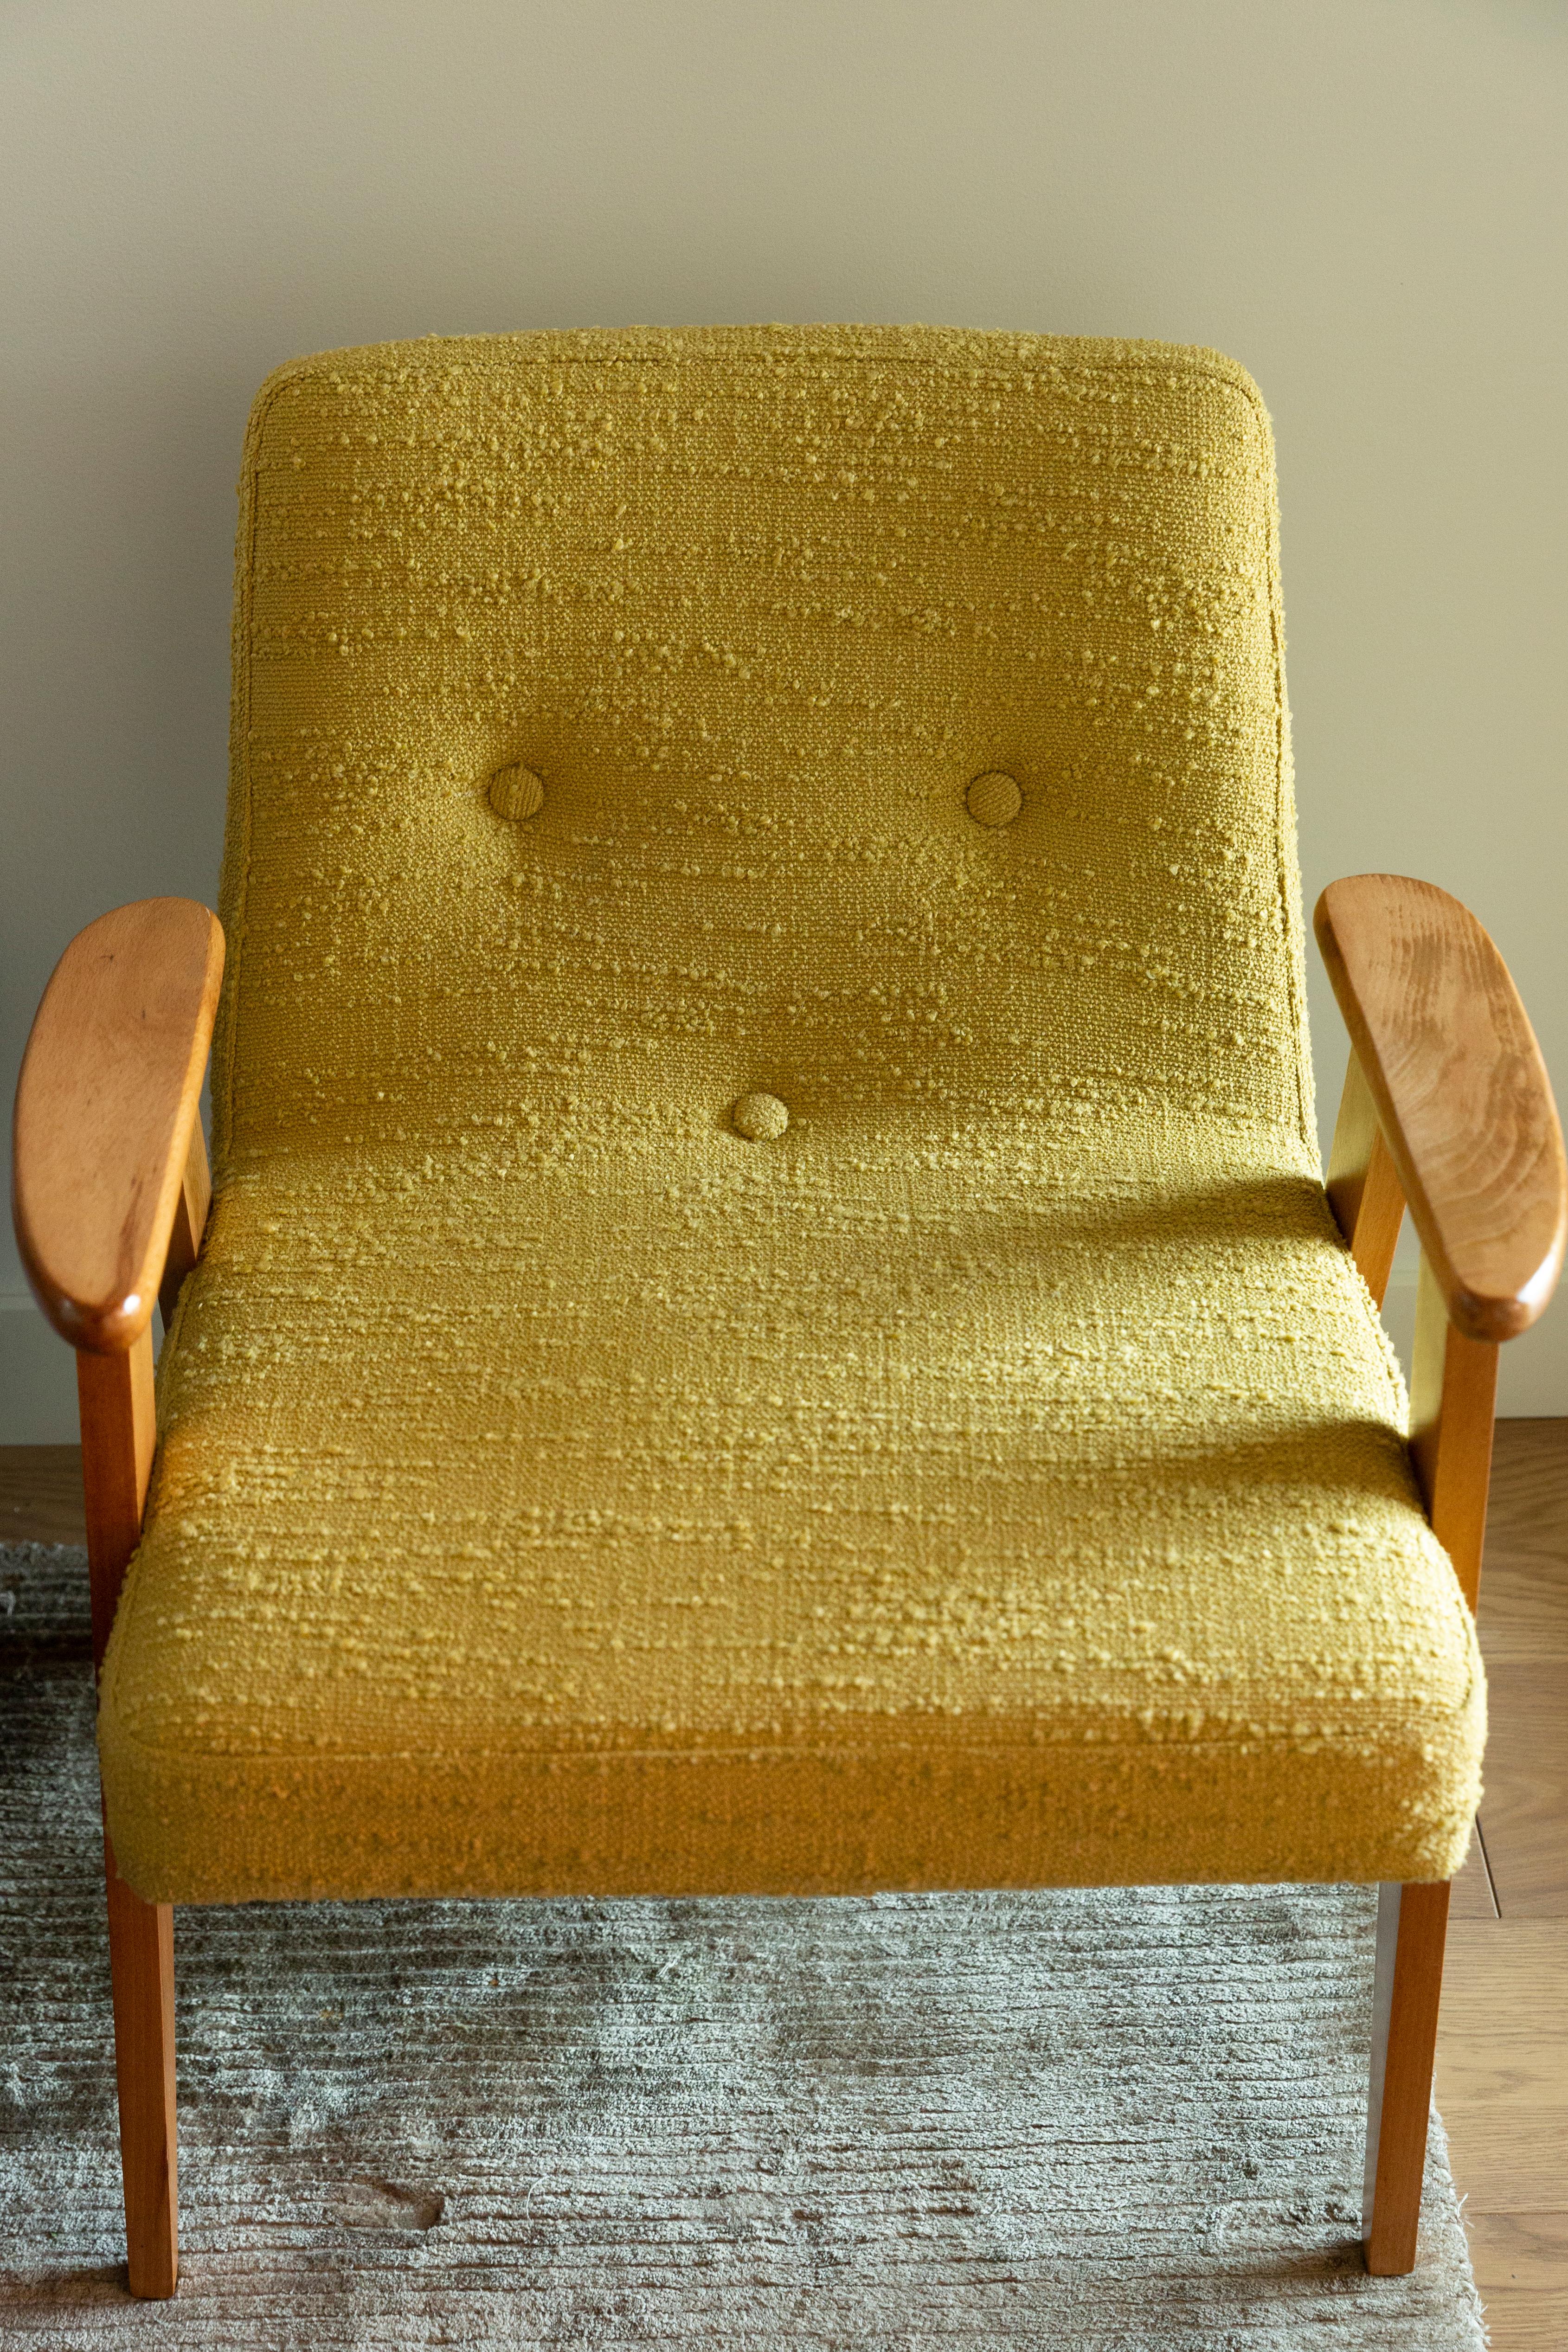 Pair of Midcentury 366 Club Armchairs in Yellow Boucle, Europe, 1960s For Sale 1